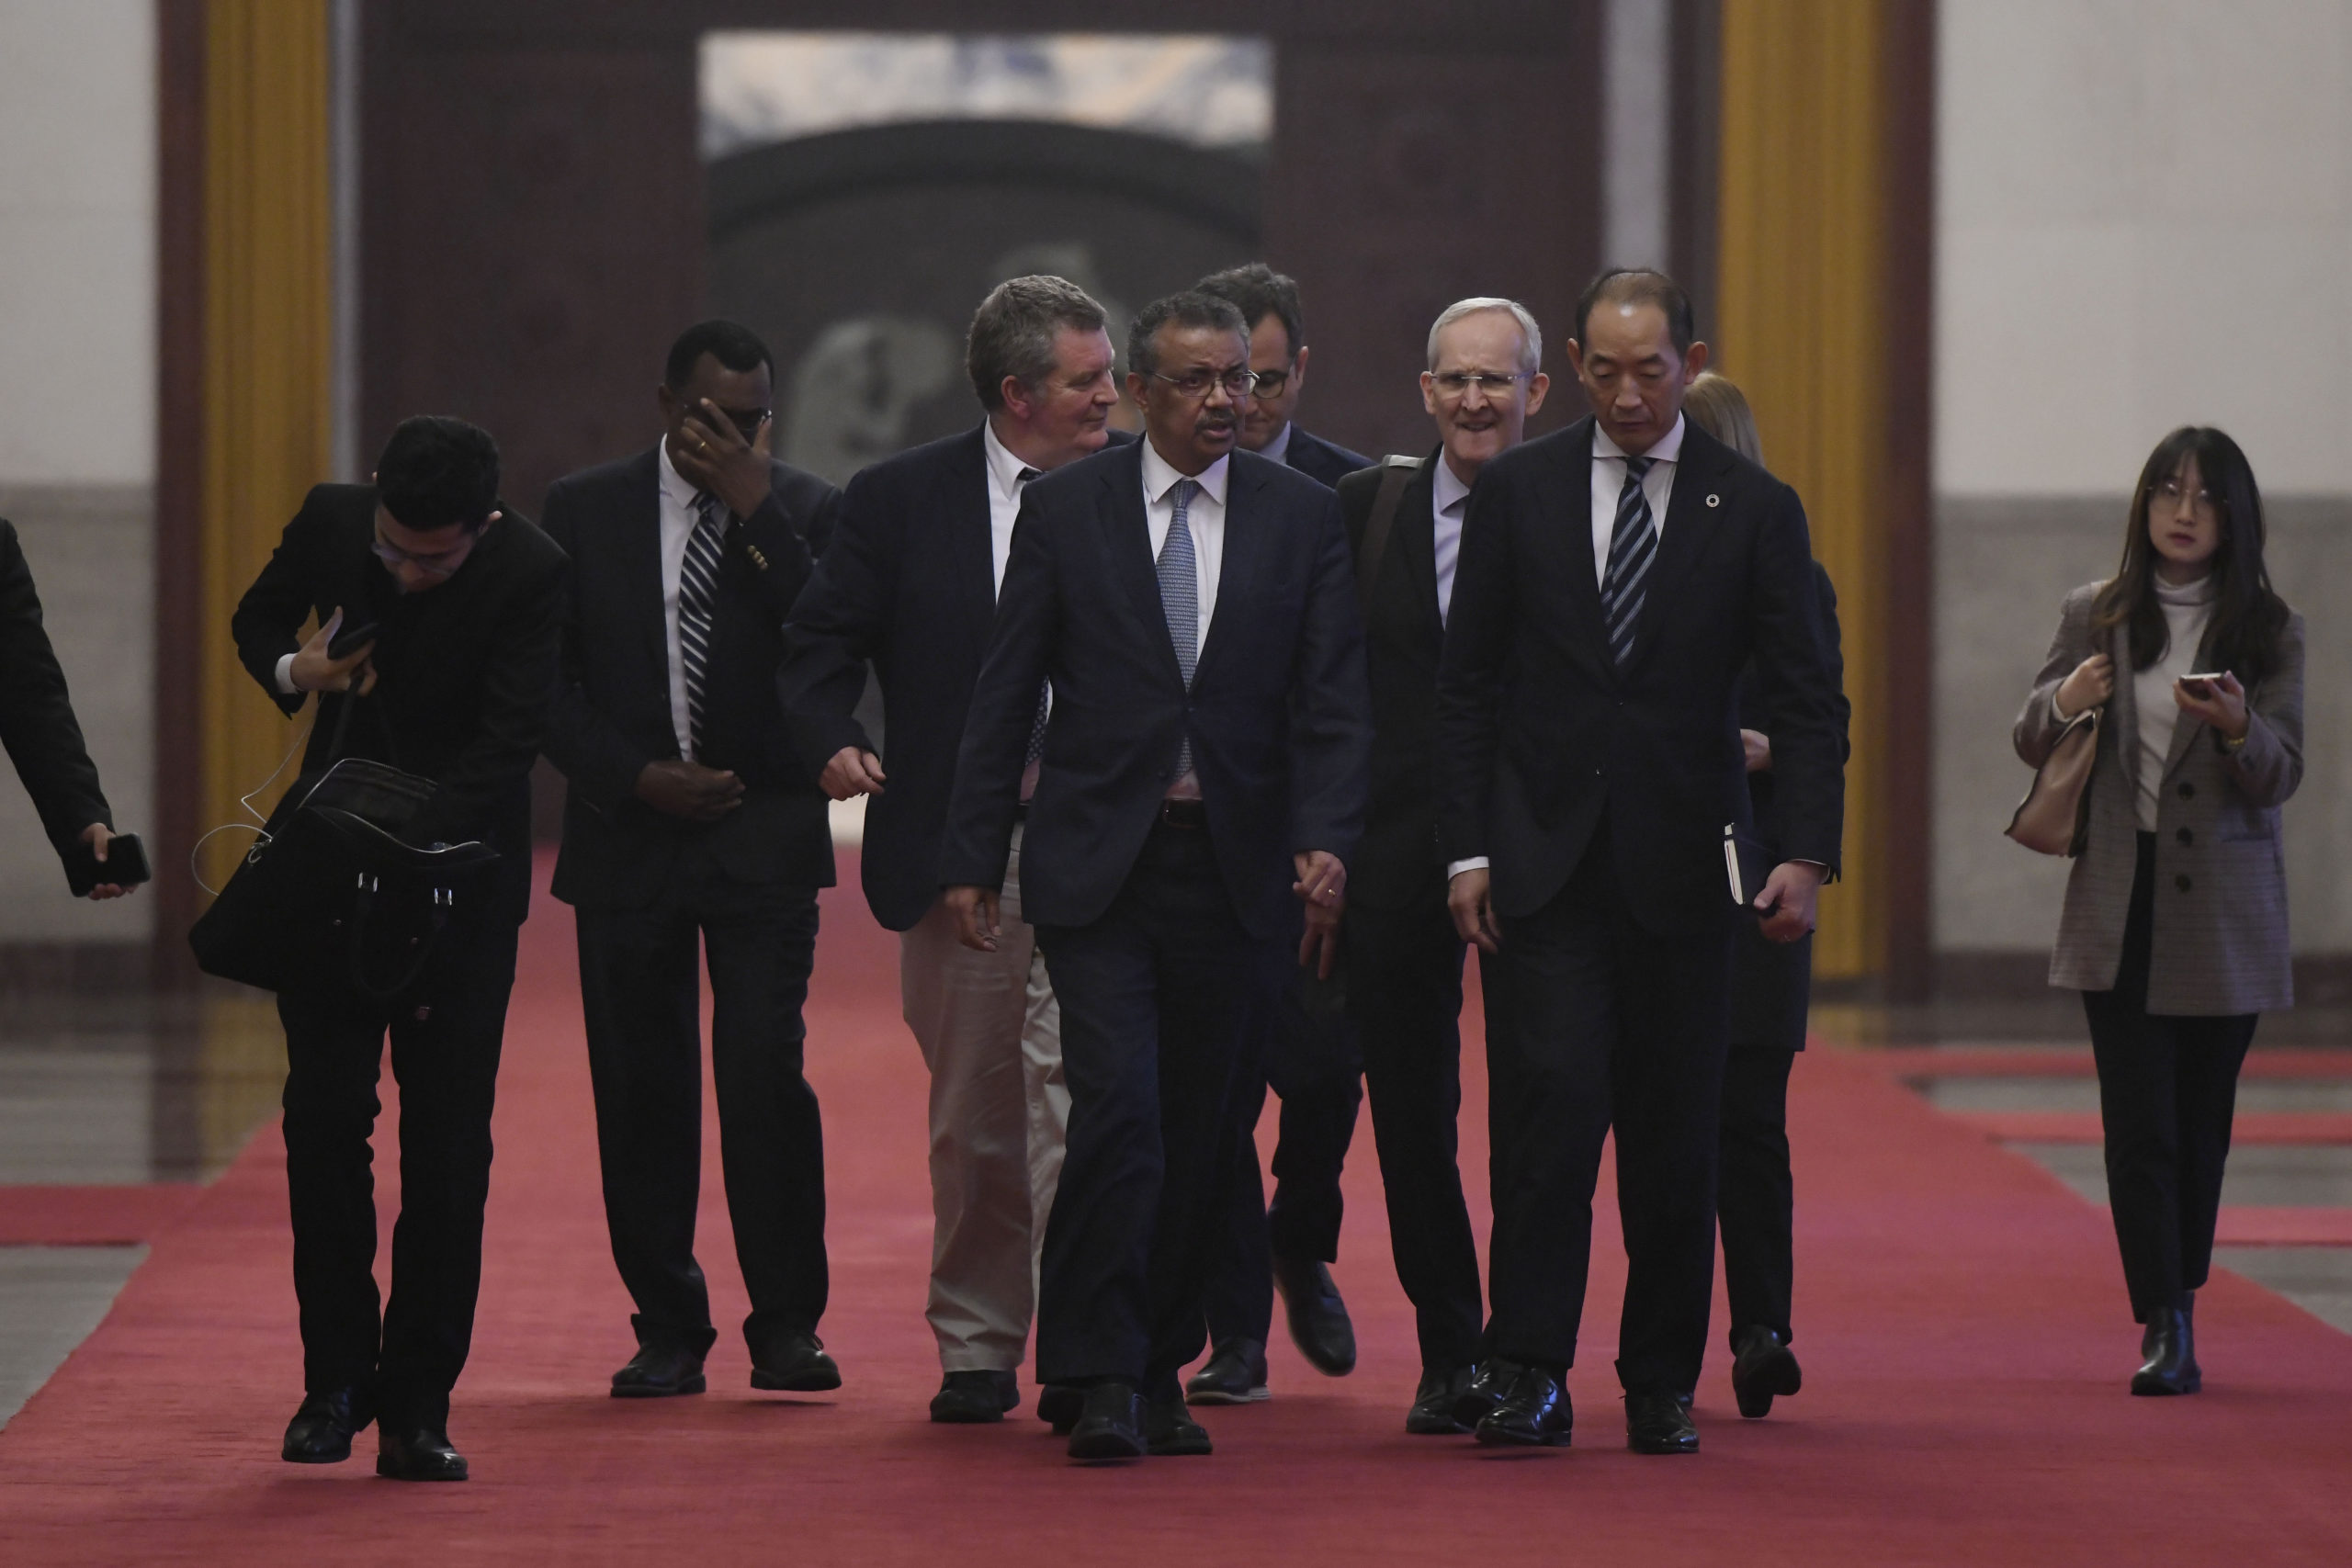 WHO Director General Tedros Adhanom arrives in Beijing, China on January 28. (Naohiko Hatta/Pool/Getty Images)